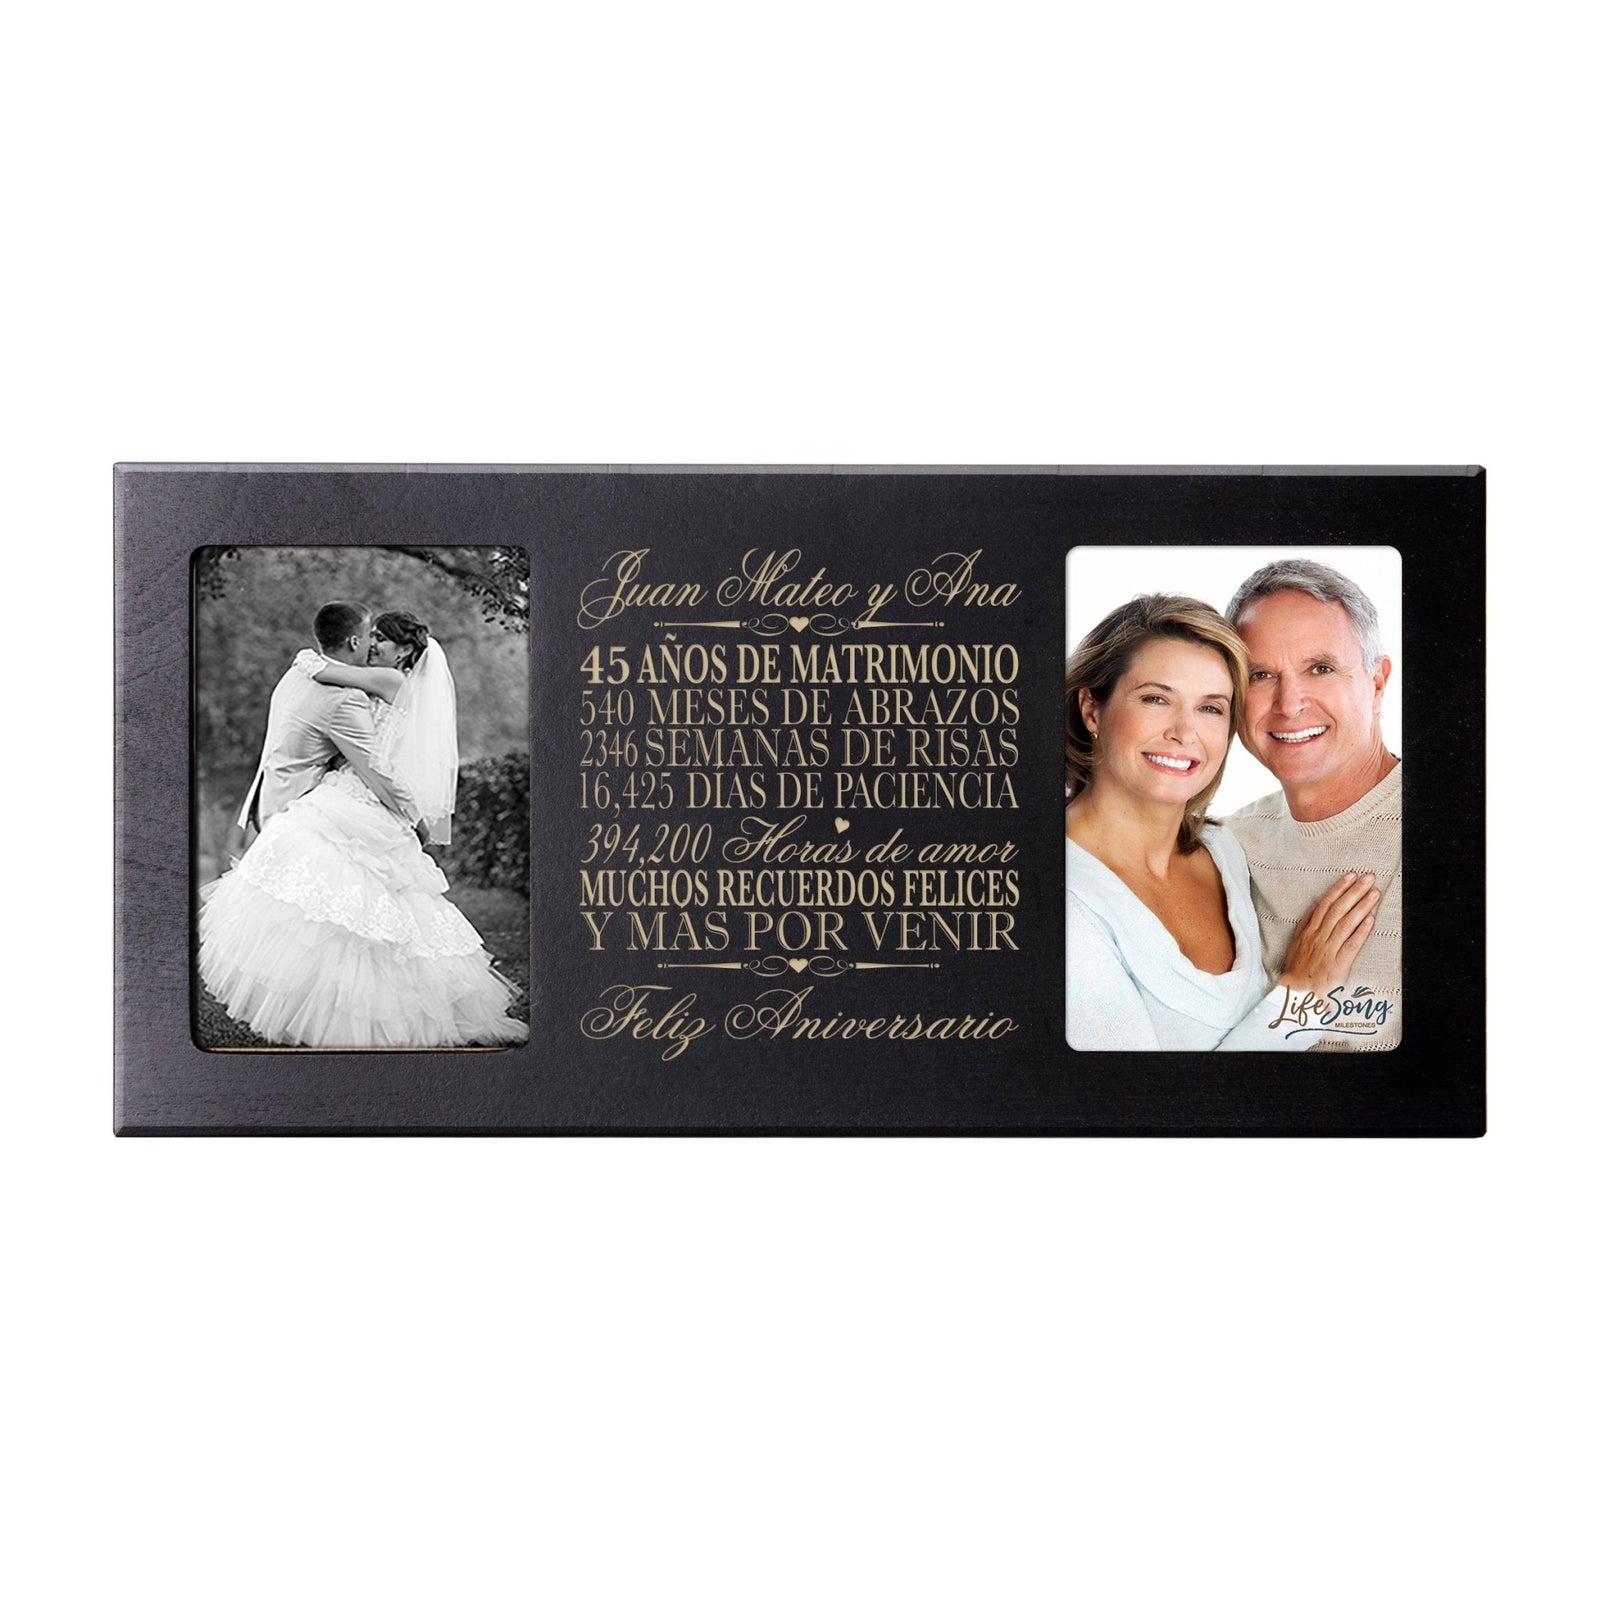 Lifesong Milestones Personalized 45th Wedding Anniversary Spanish Picture Frame